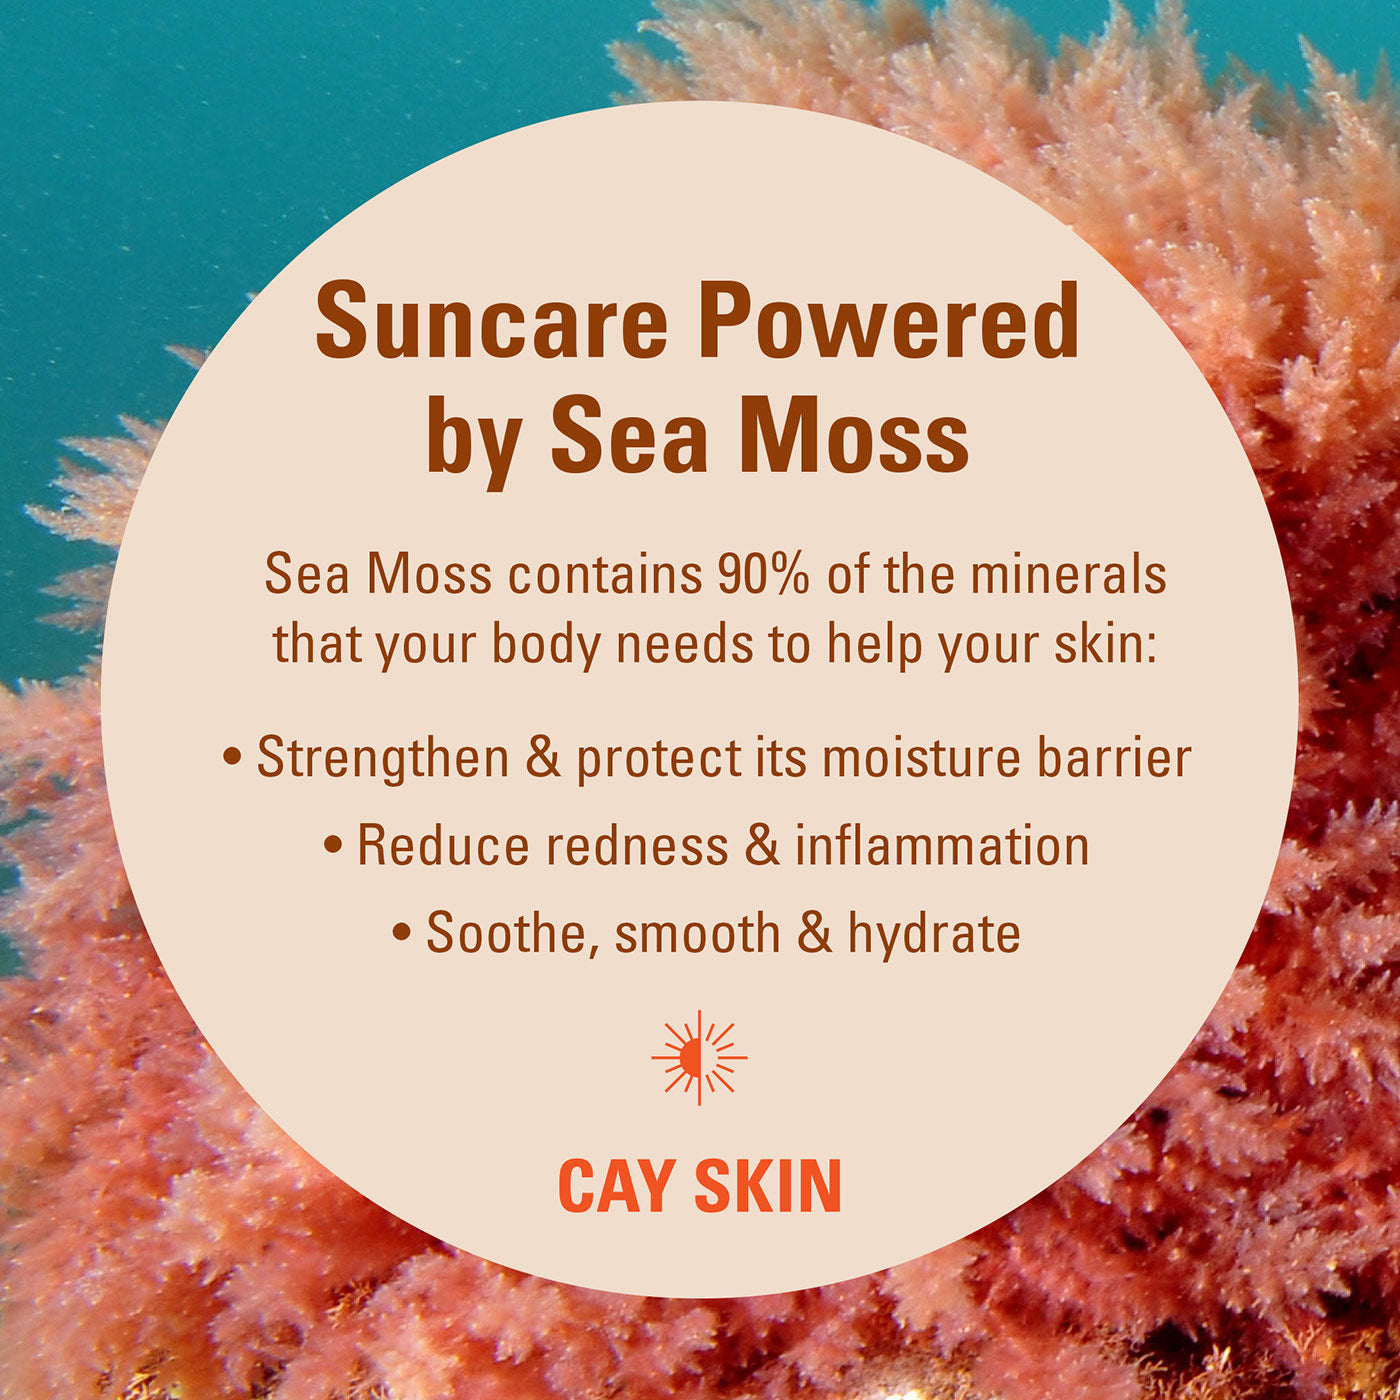 sea moss contains minerals that your body needs